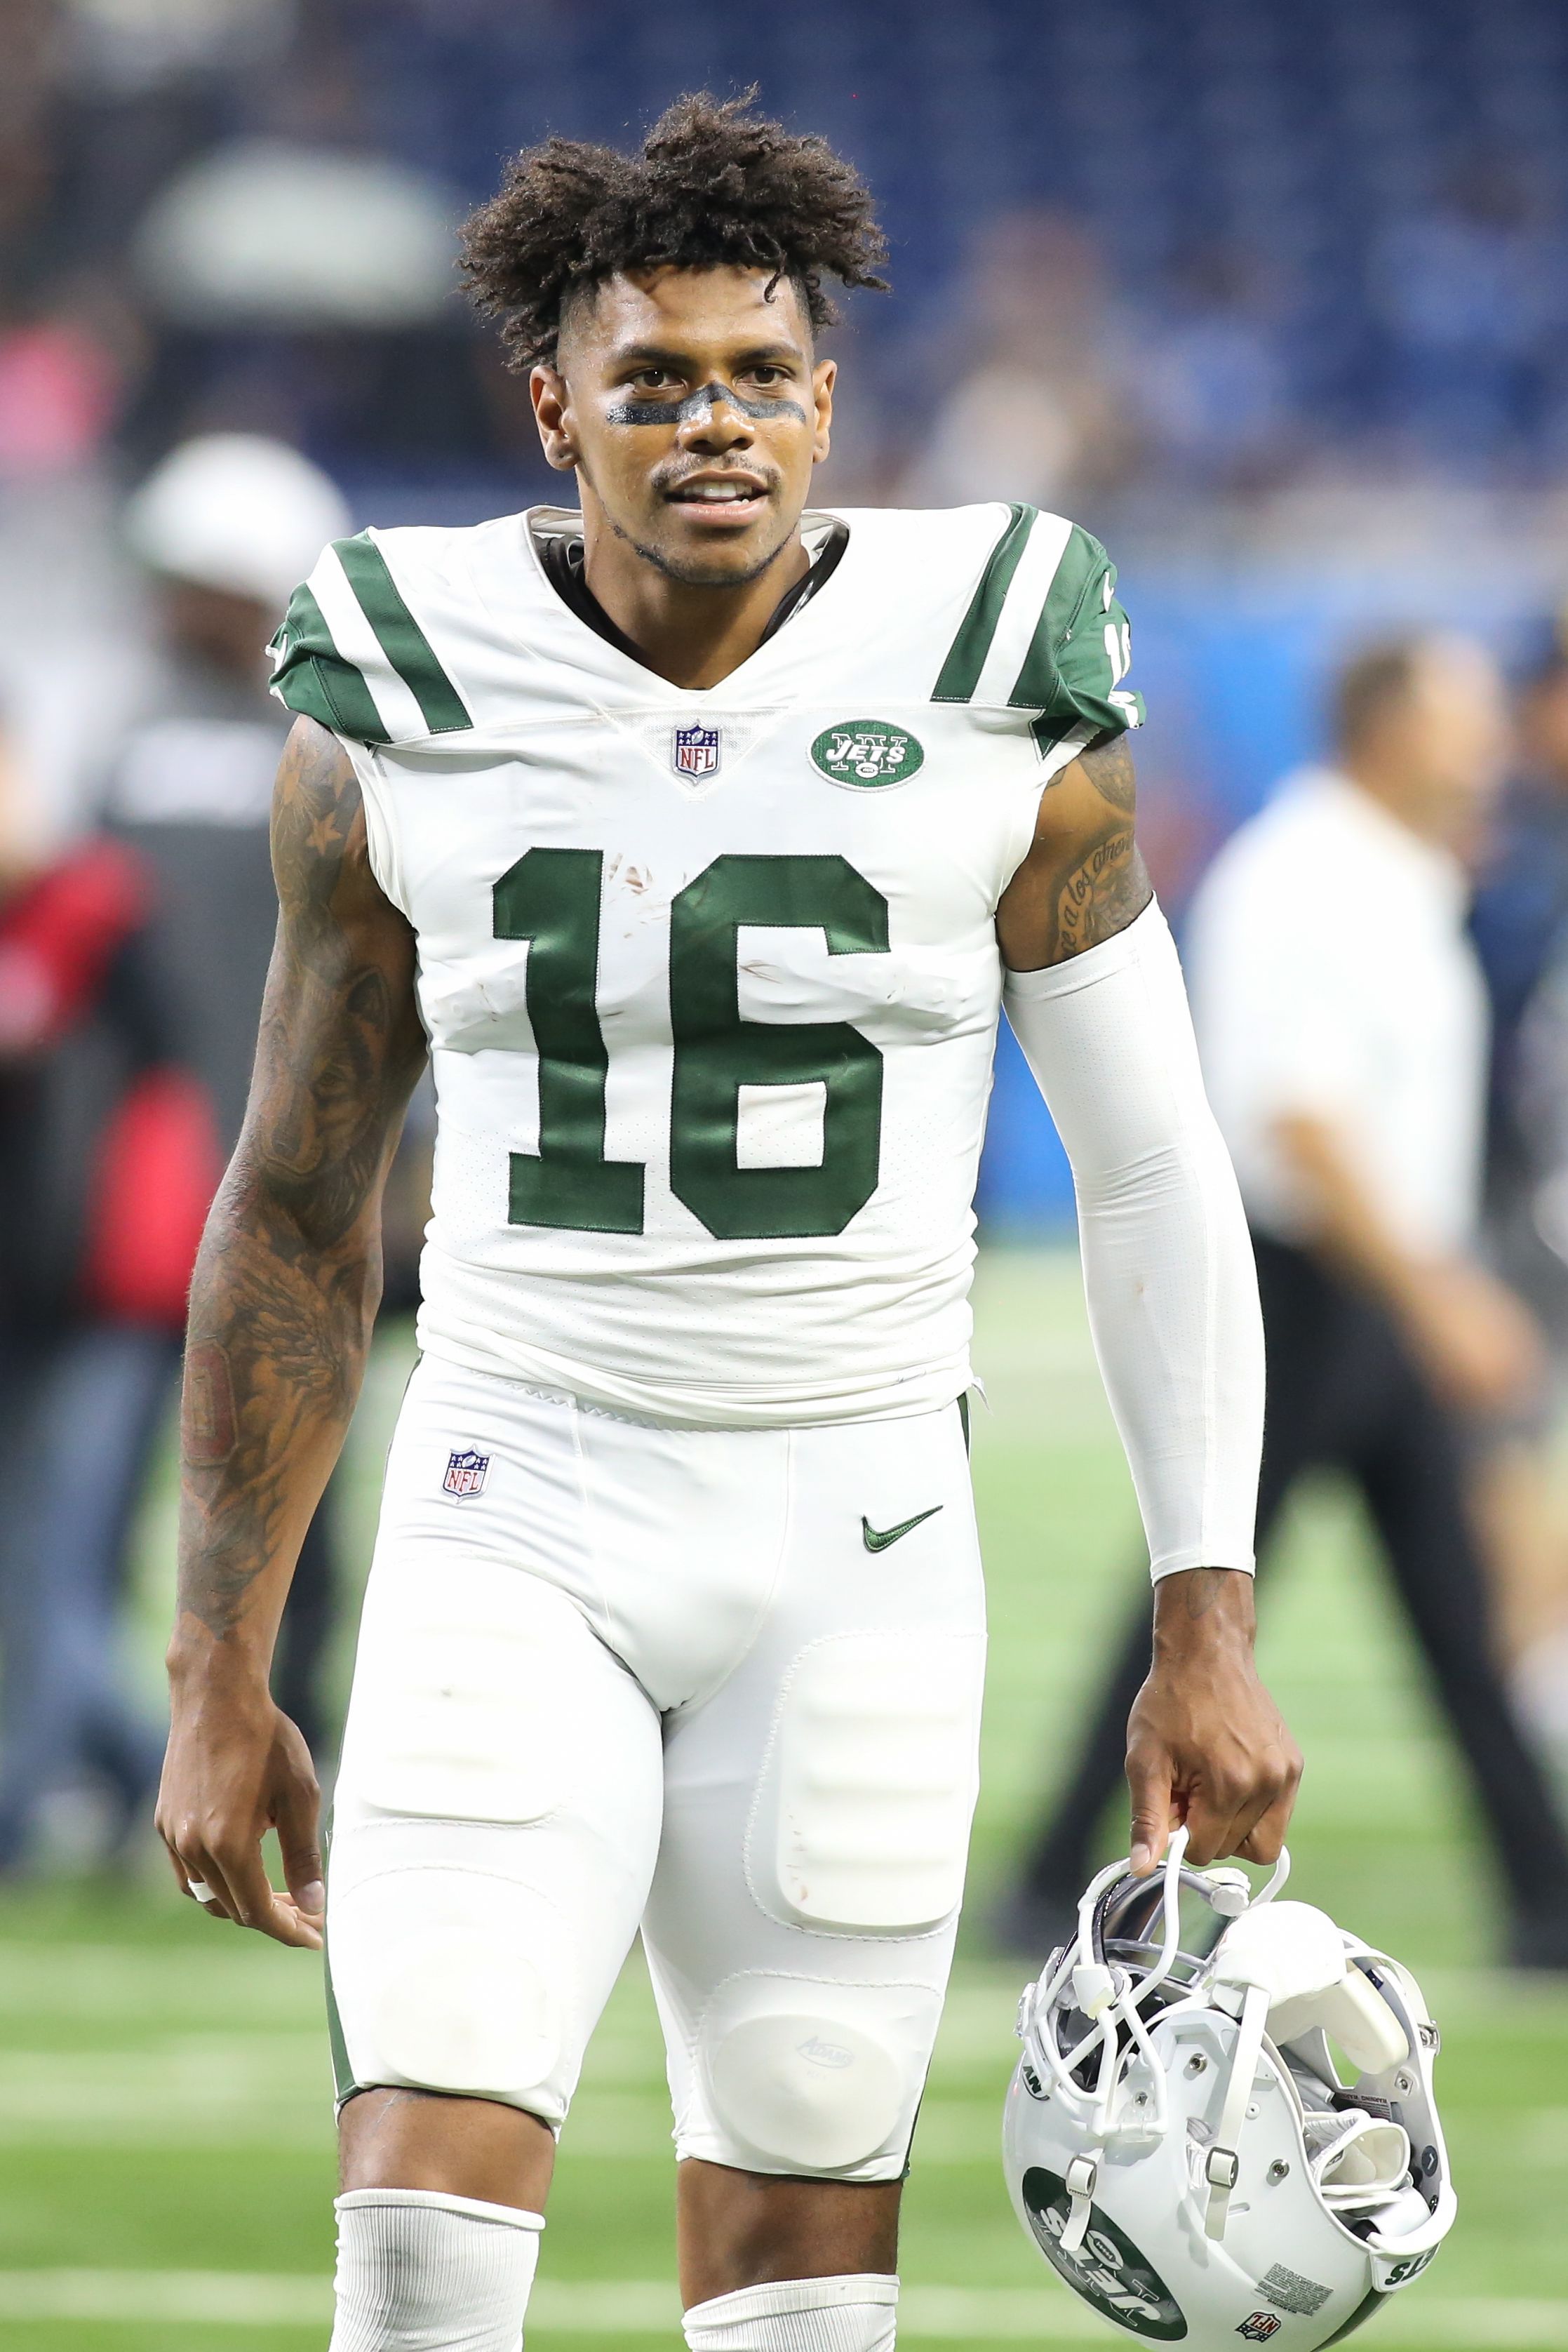 Terrelle Pryor (16) walks off of the field at the conclusion of a regular season game between the New York Jets and the Detroit Lions on September 10, 2018 at Ford Field in Detroit, Michigan. | Source: Getty Images